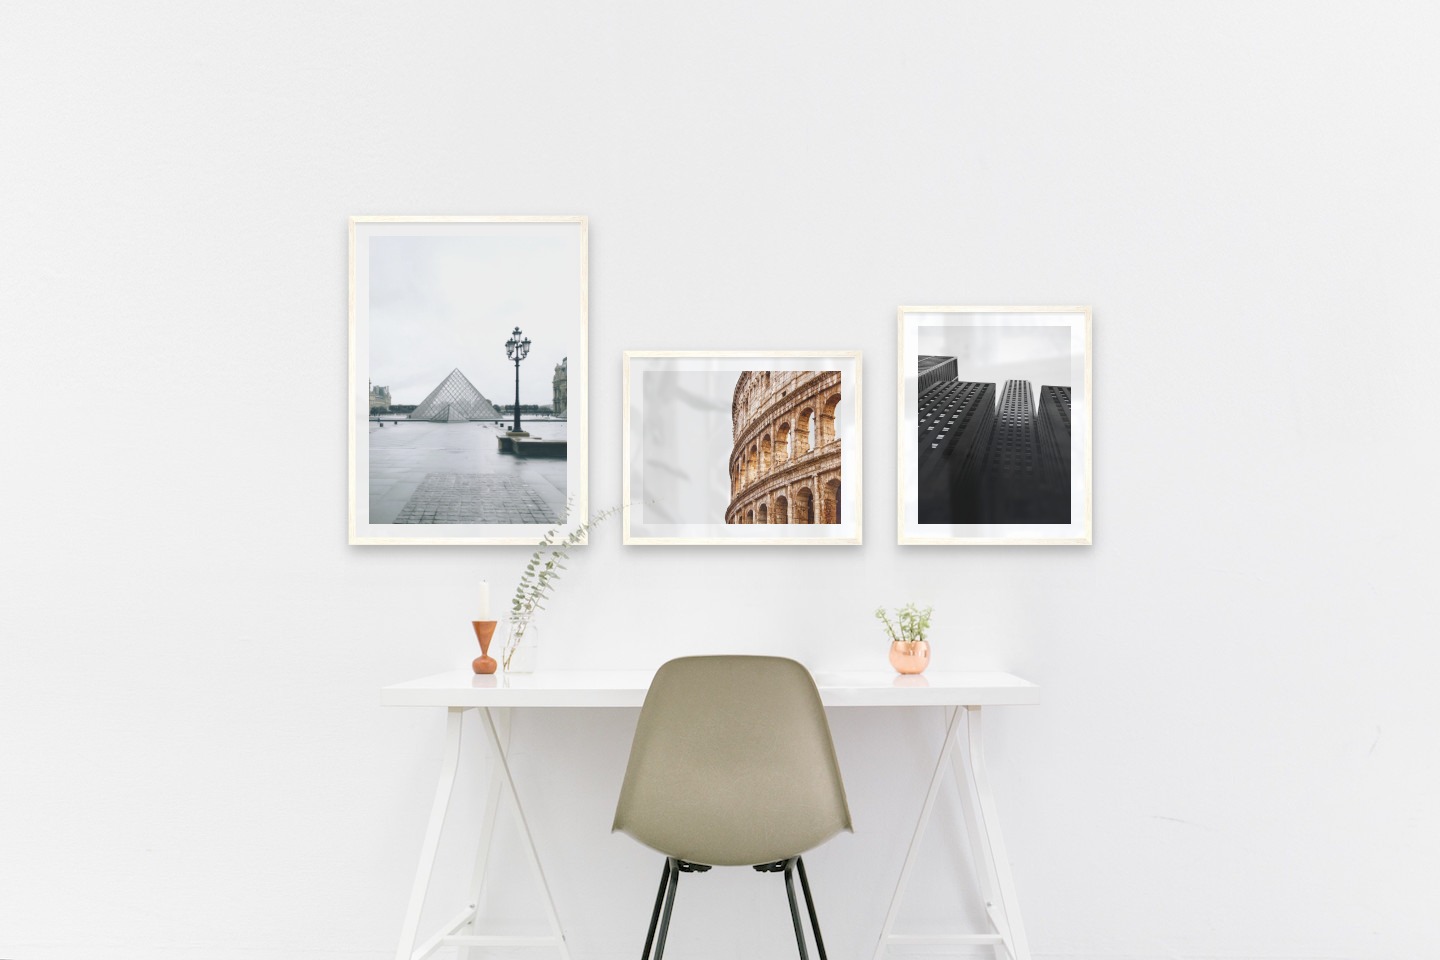 Gallery wall with picture frames in light wood in sizes 50x70 and 40x50 with prints "Louvre in Paris", "Colosseum and Rome" and "High buildings"